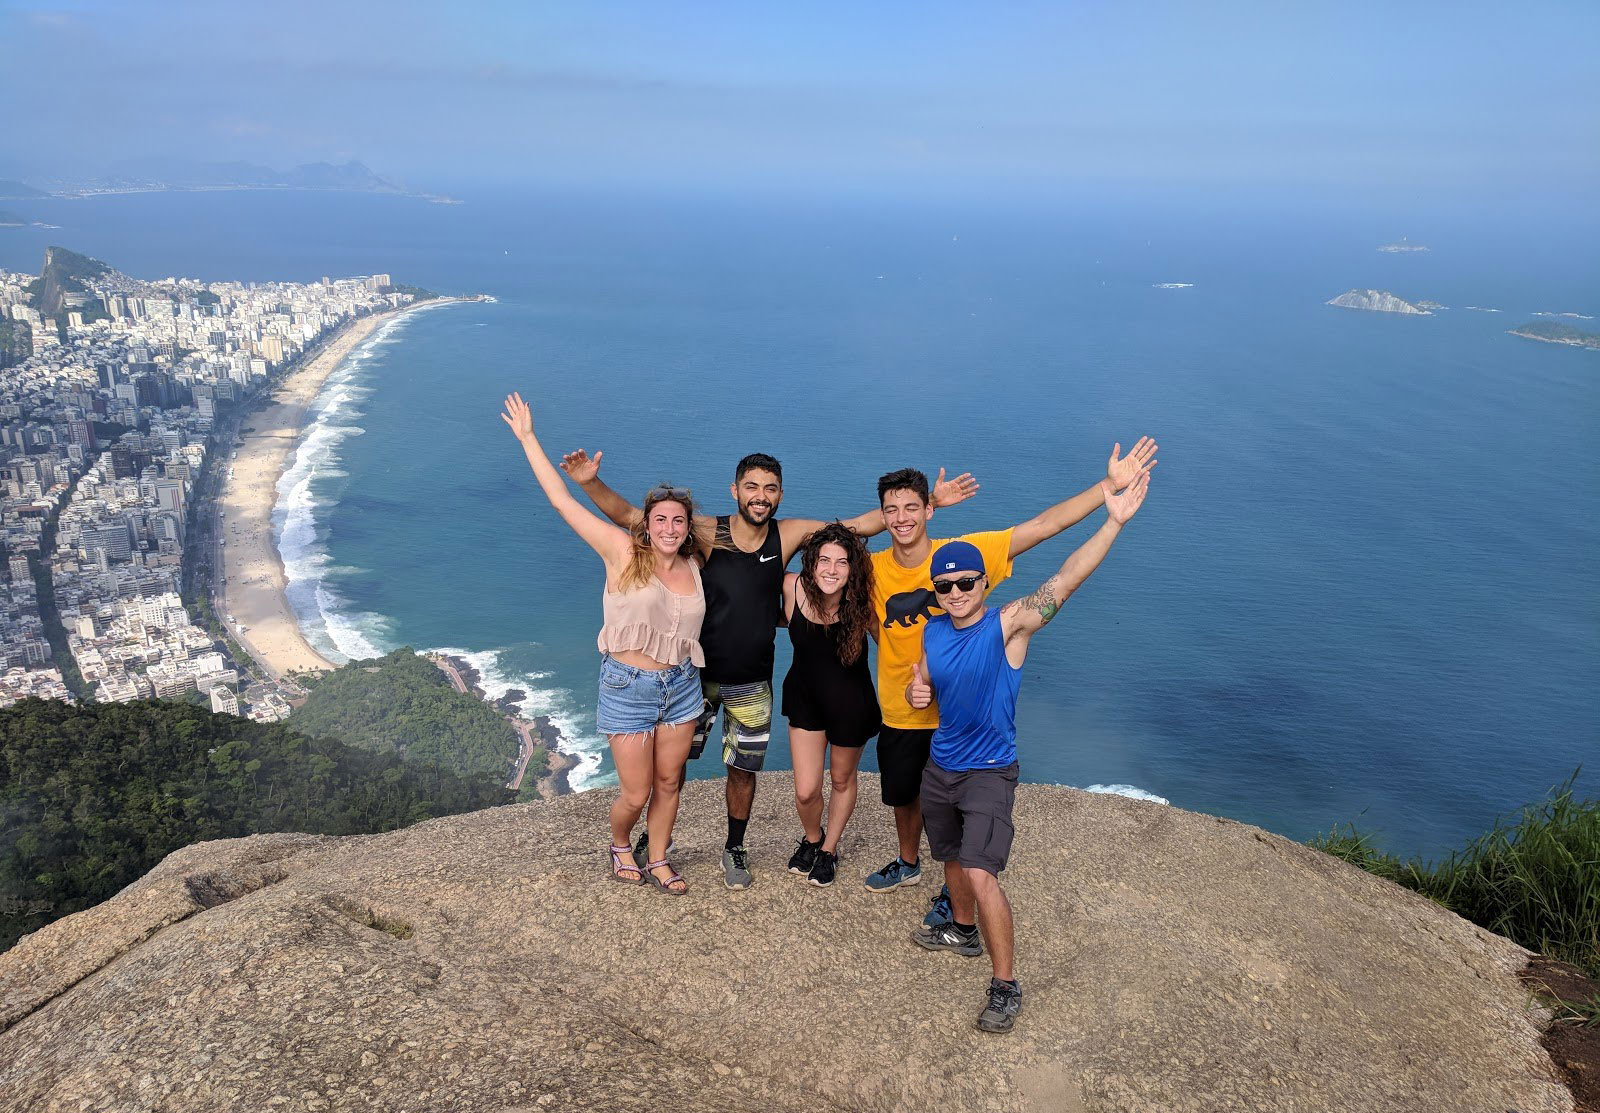 Ricardo with friends on a mountain top in Brazil